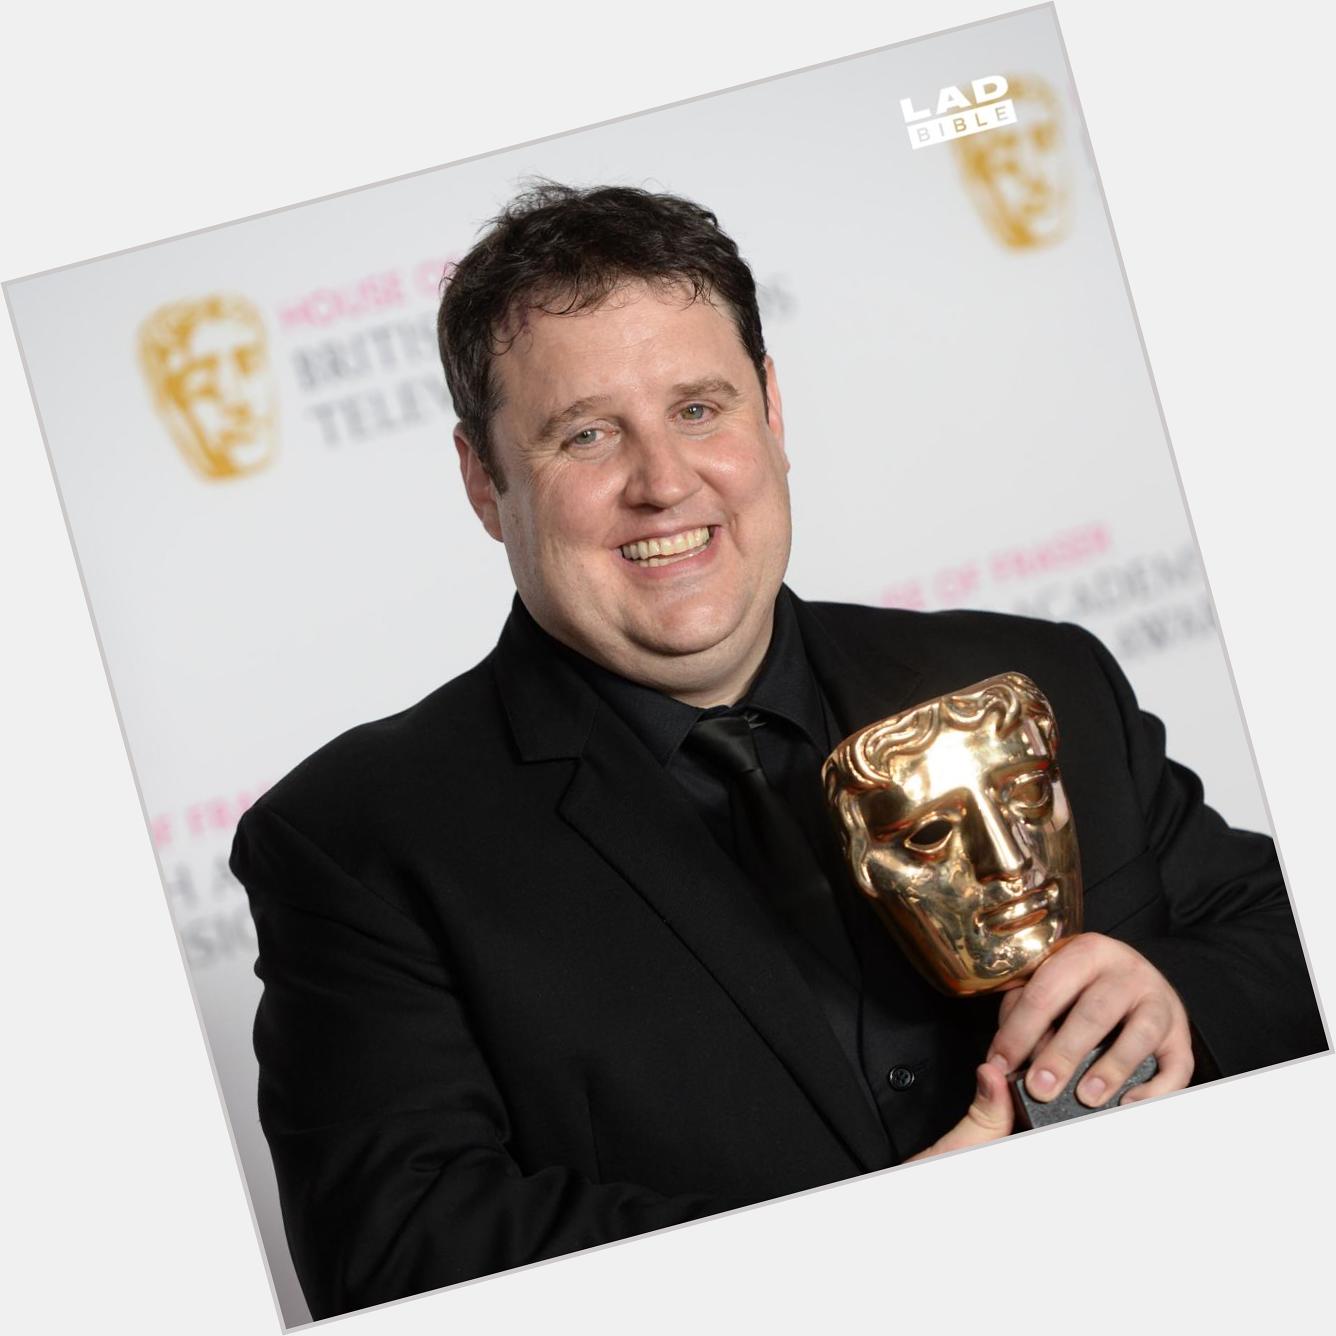 Happy 46th birthday to the legend that is Peter Kay! 